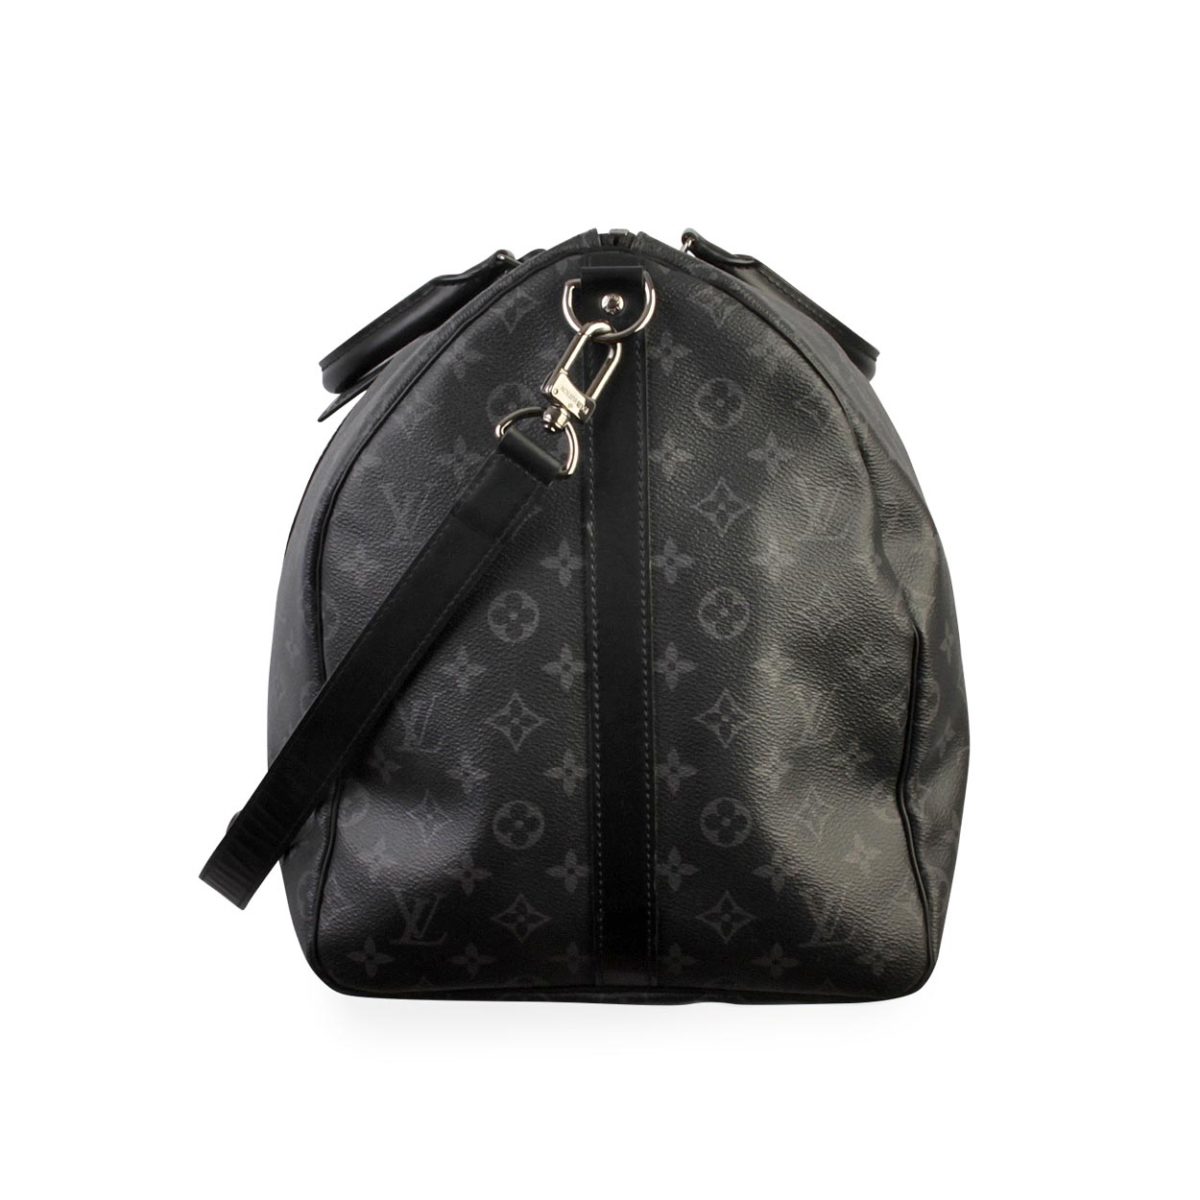 LOUIS VUITTON Monogram Eclipse Keepall Bandouliere 55 | Luxity